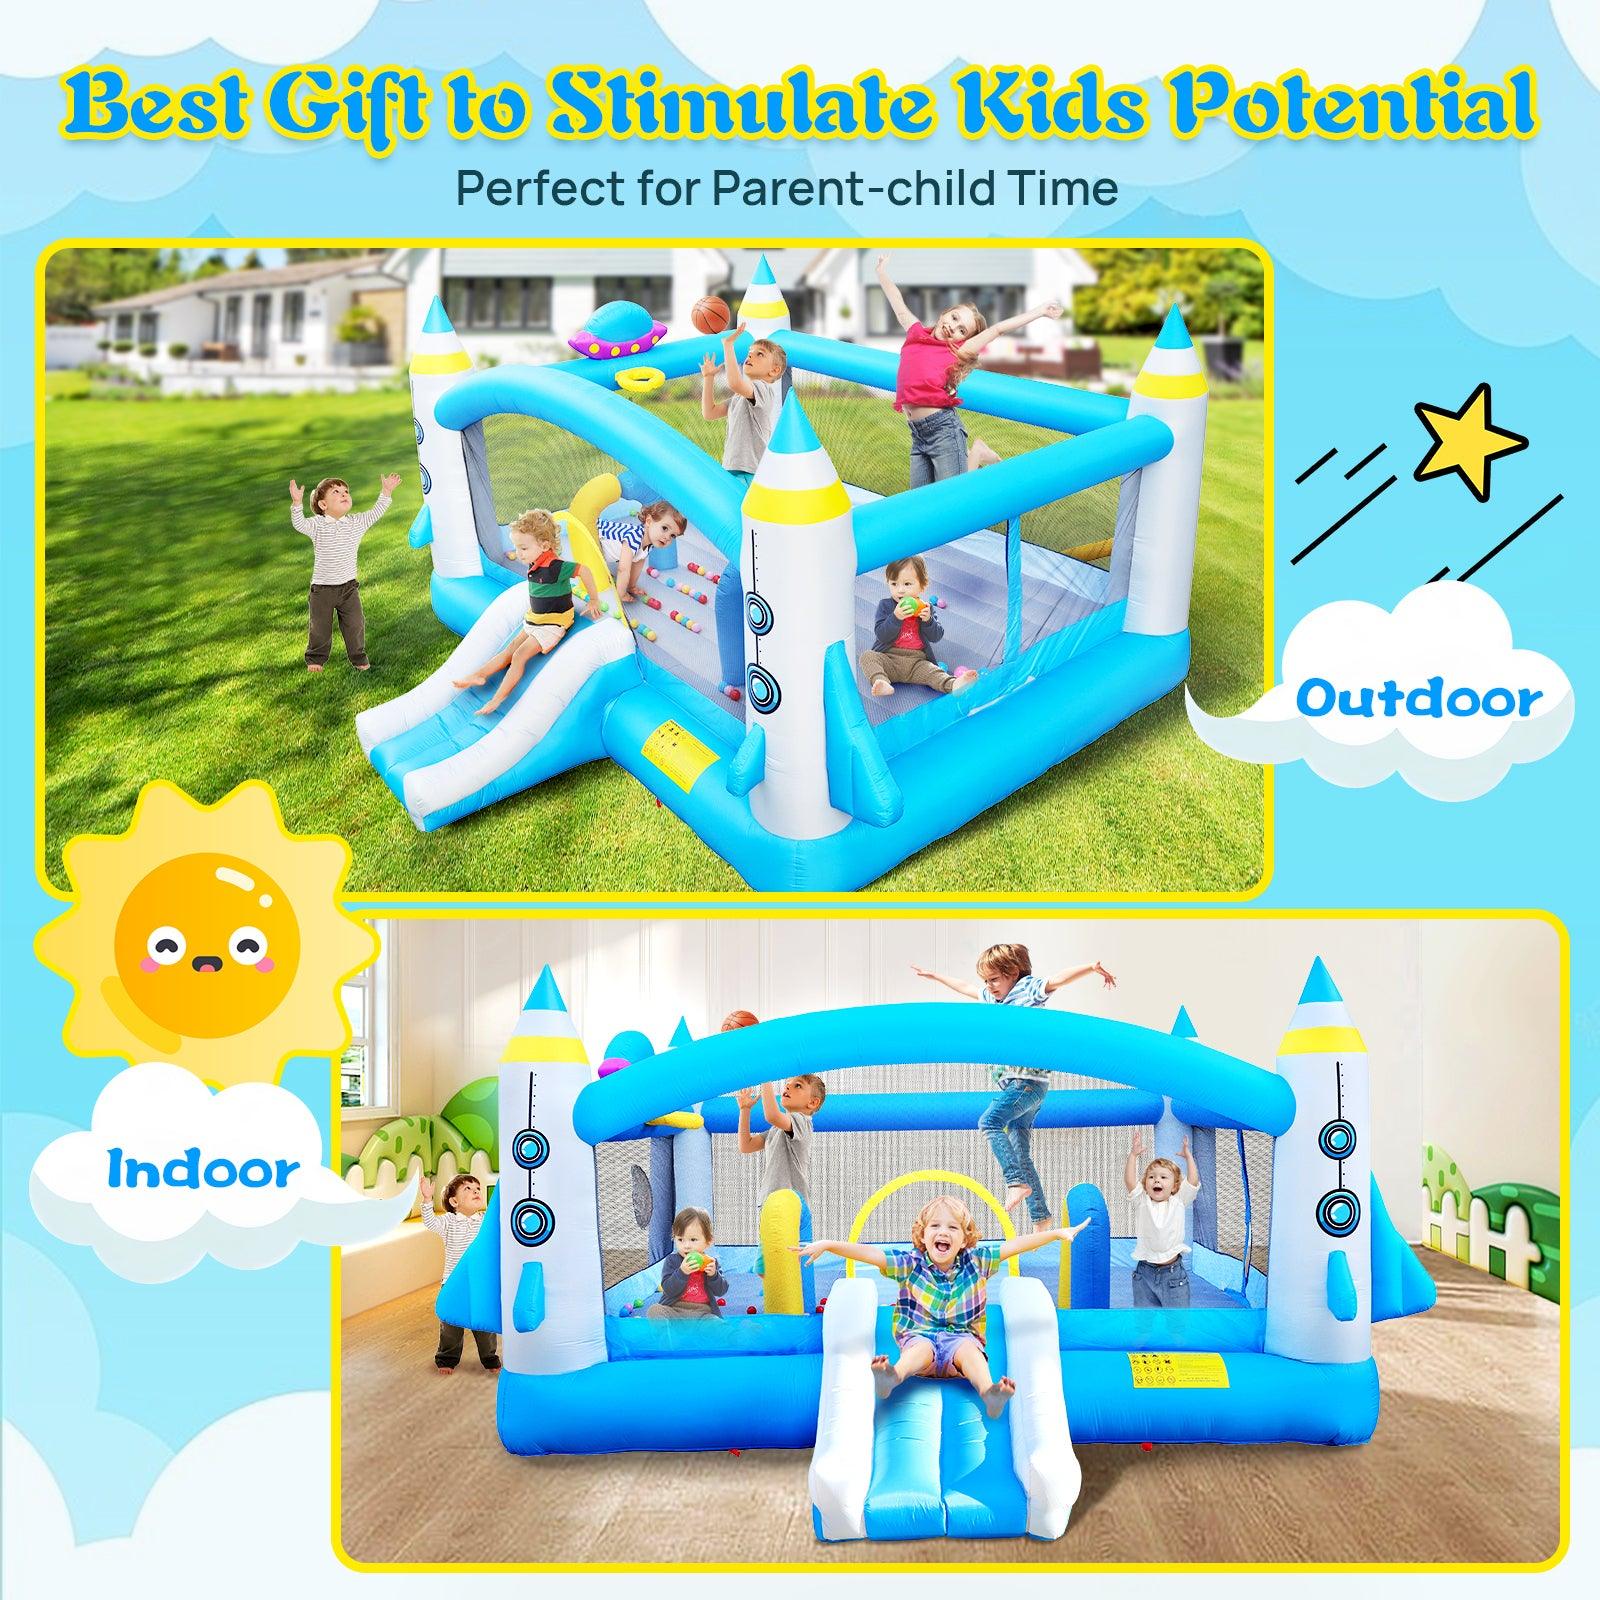 🆓🚛 Multifunctional Jump 'N Slide Inflatable Bouncer for Kids Complete Setup With Blower - 198" X 180" Play Area - 96" Tall